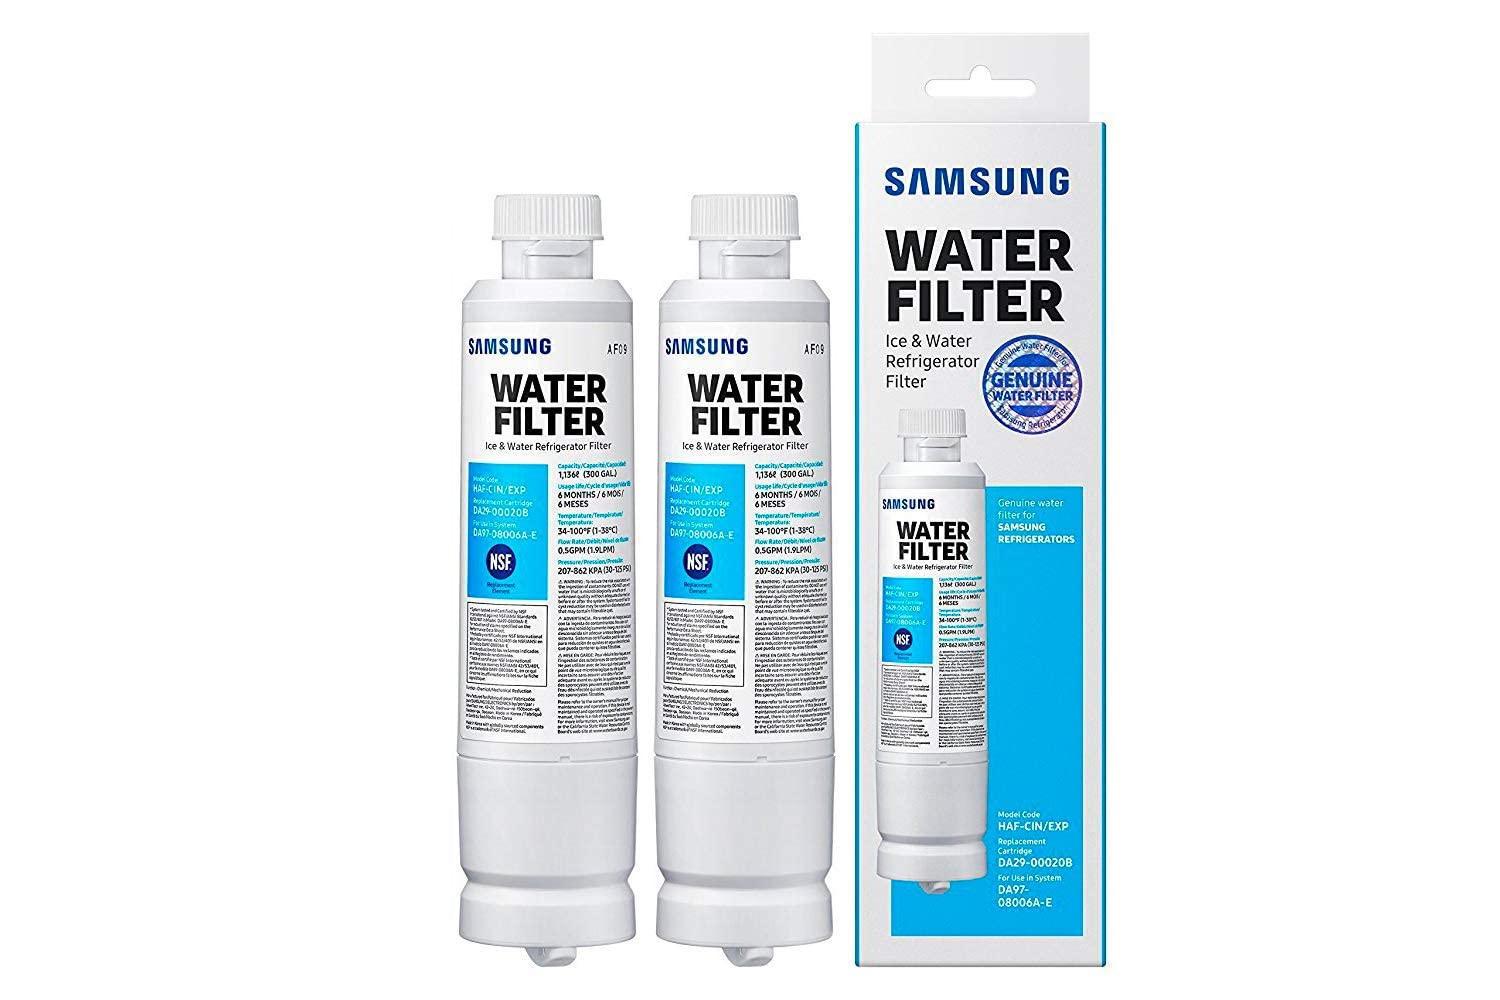 2-Pack Samsung HAF-CIN Water Filters $37.05 ($18.52 each), 2-Pack HAF-QIN $46.55 ($23.28 each) w/ S&S + Free Shipping